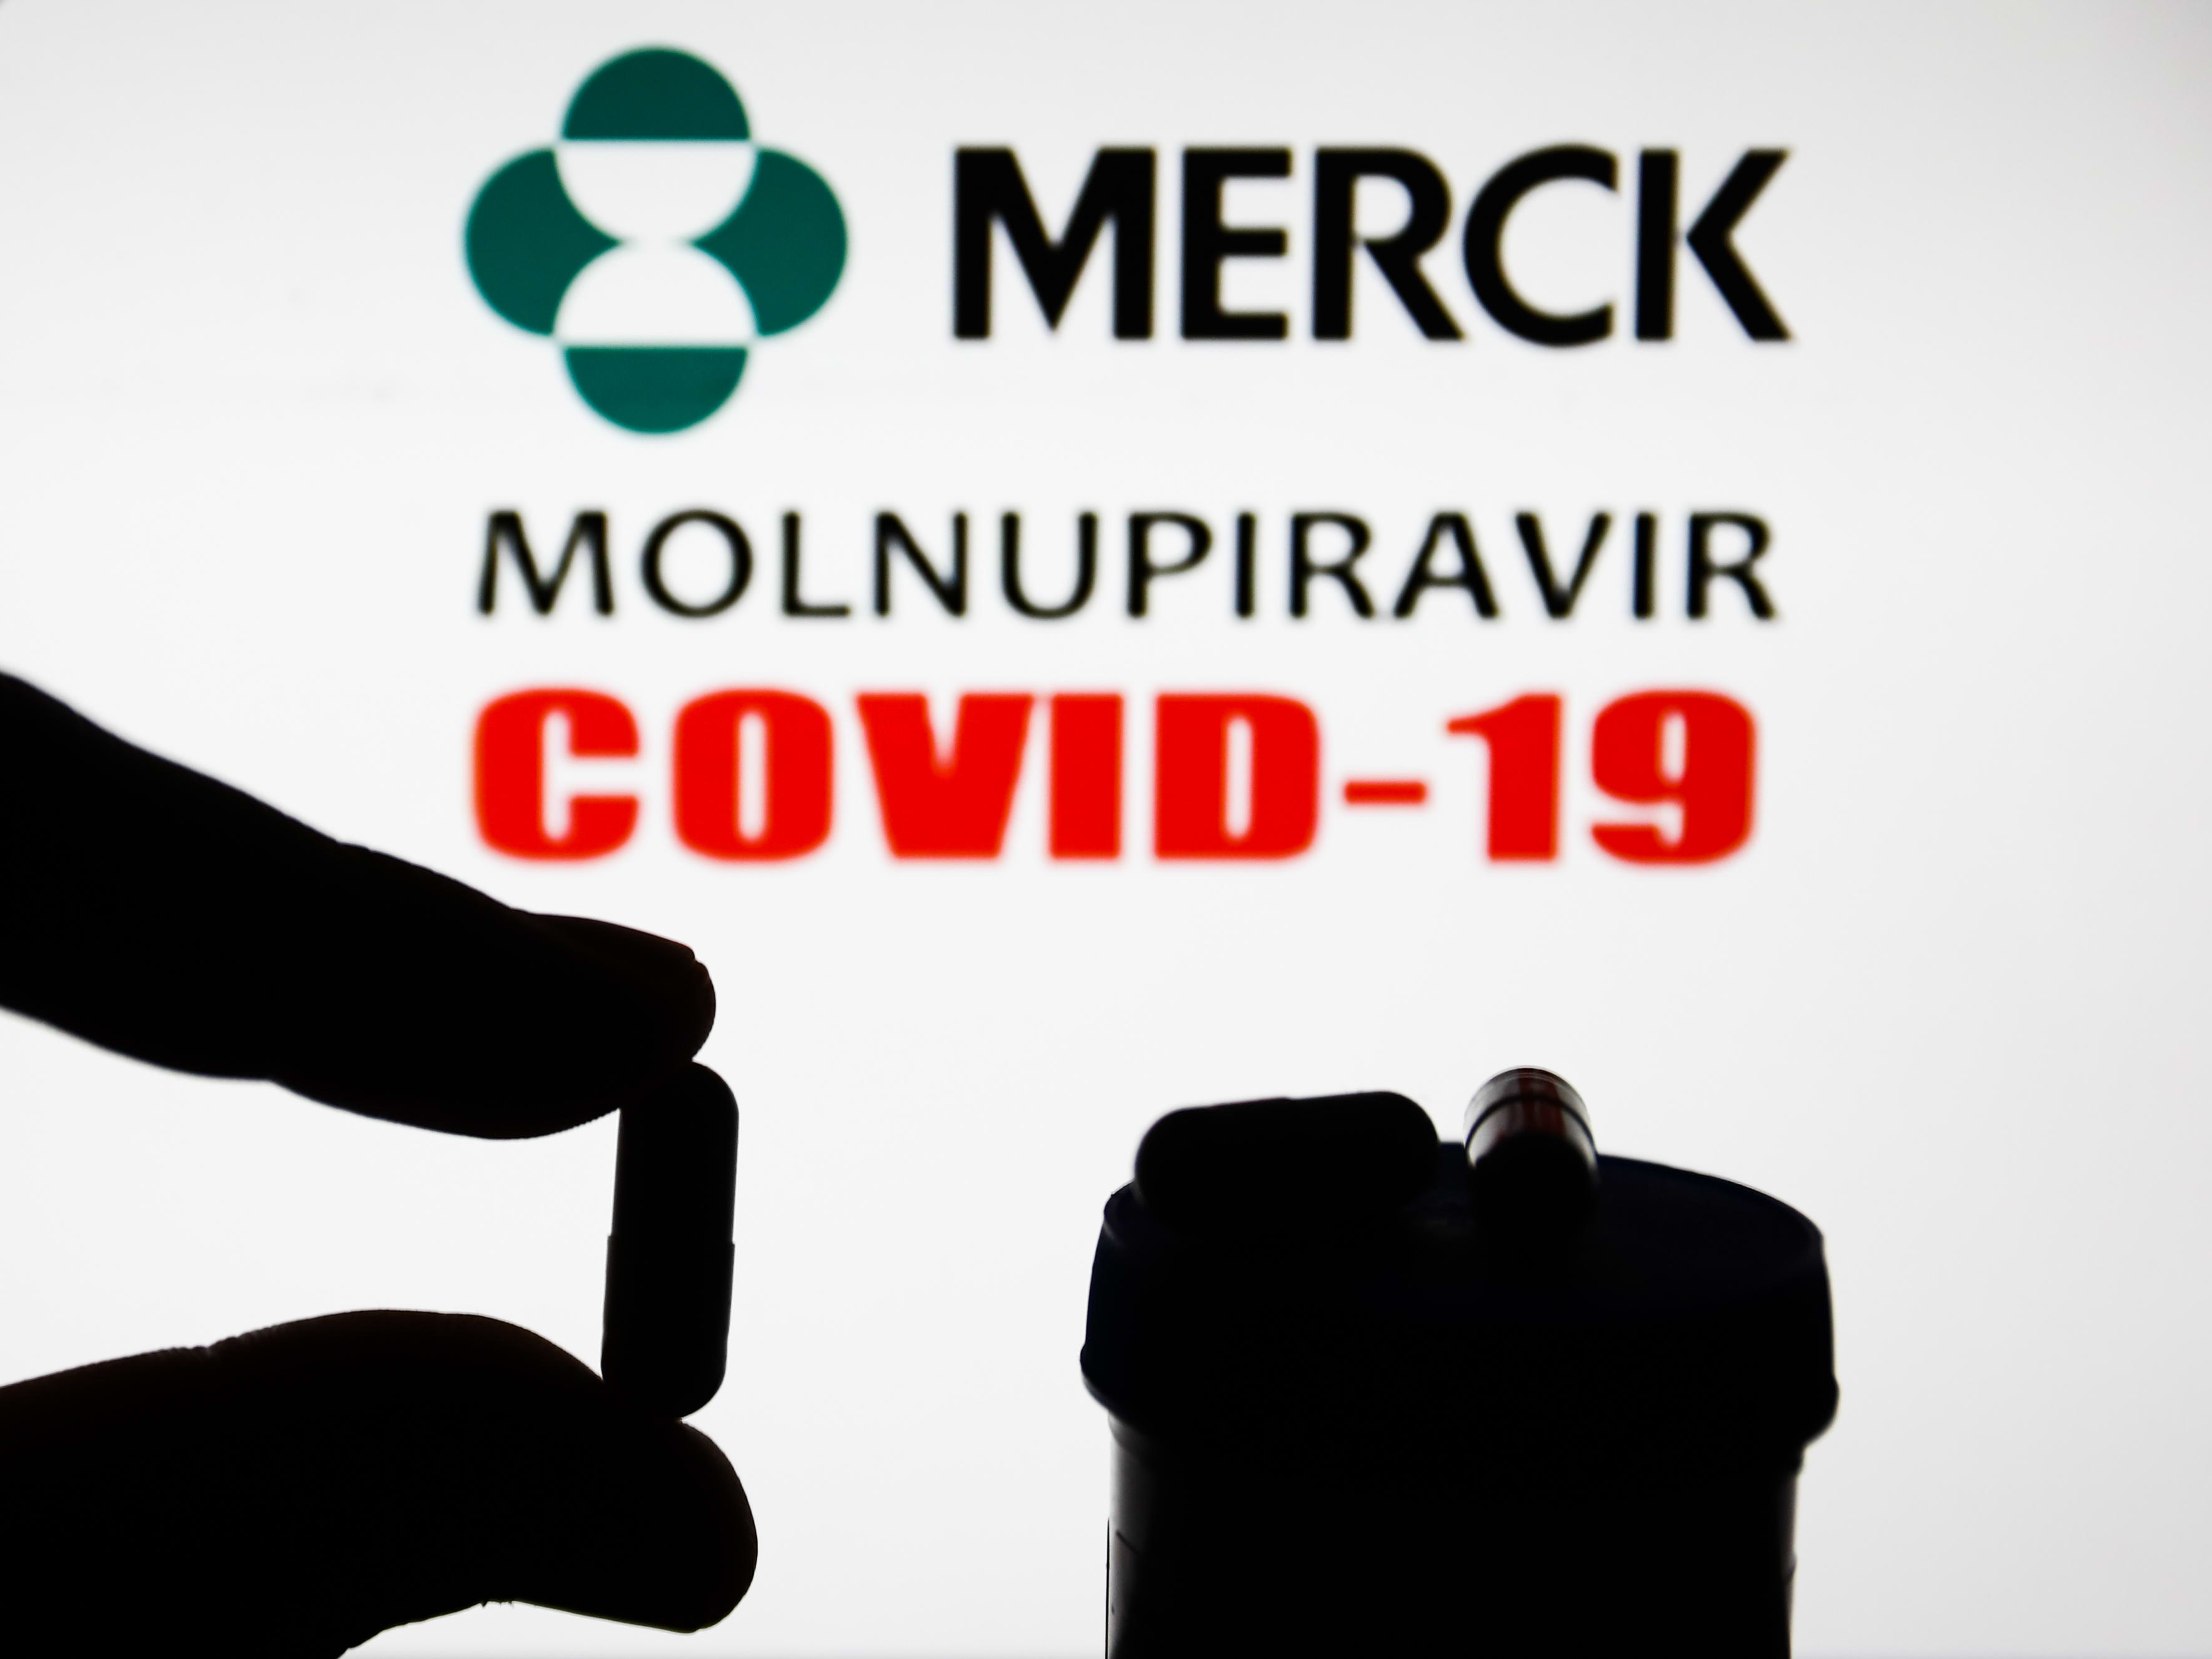 FDA advisory panel narrowly endorses Merck’s oral Covid treatment pill despite reduced efficacy and safety questions – CNBC